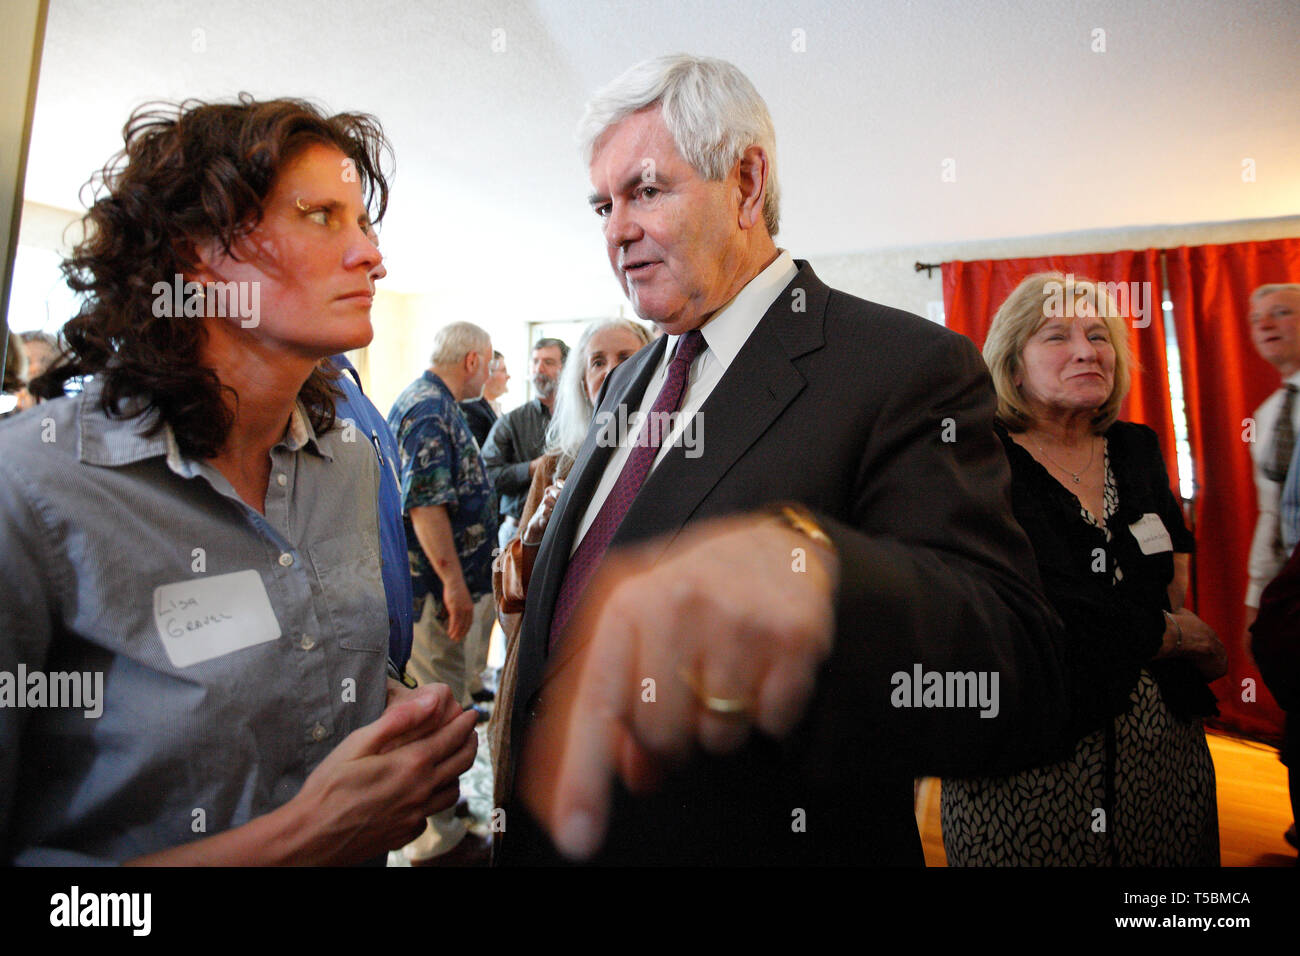 Former Speaker Newt Gingrich vistits a houseparty hosted by lawyer Ovide Lamontagne in Manchester, in his bid for the Presidency in 2012. Stock Photo